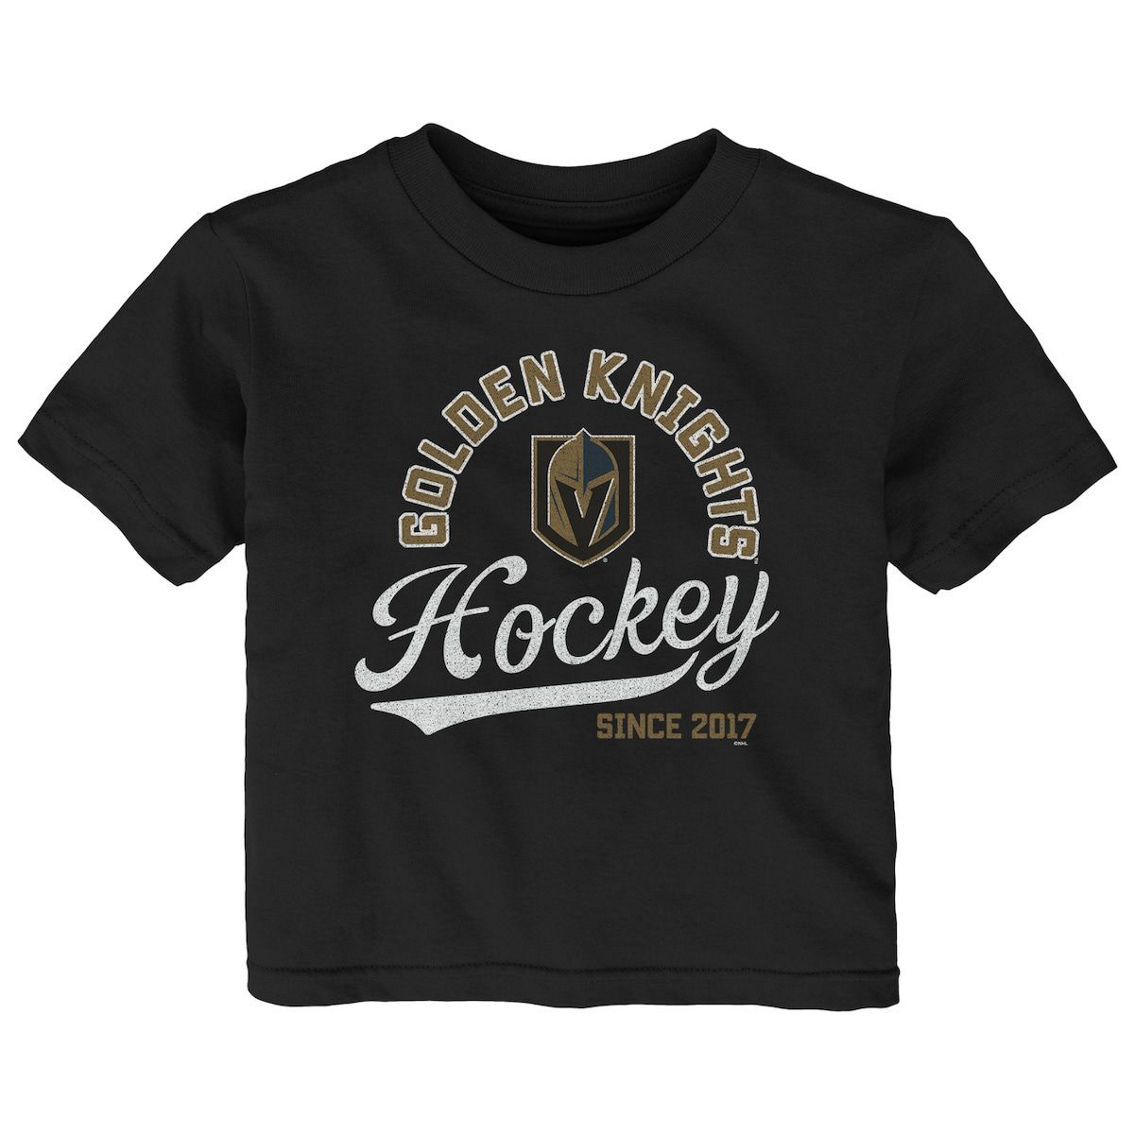 Outerstuff Infant Black Vegas Golden Knights Take The Lead T-Shirt - Image 2 of 2